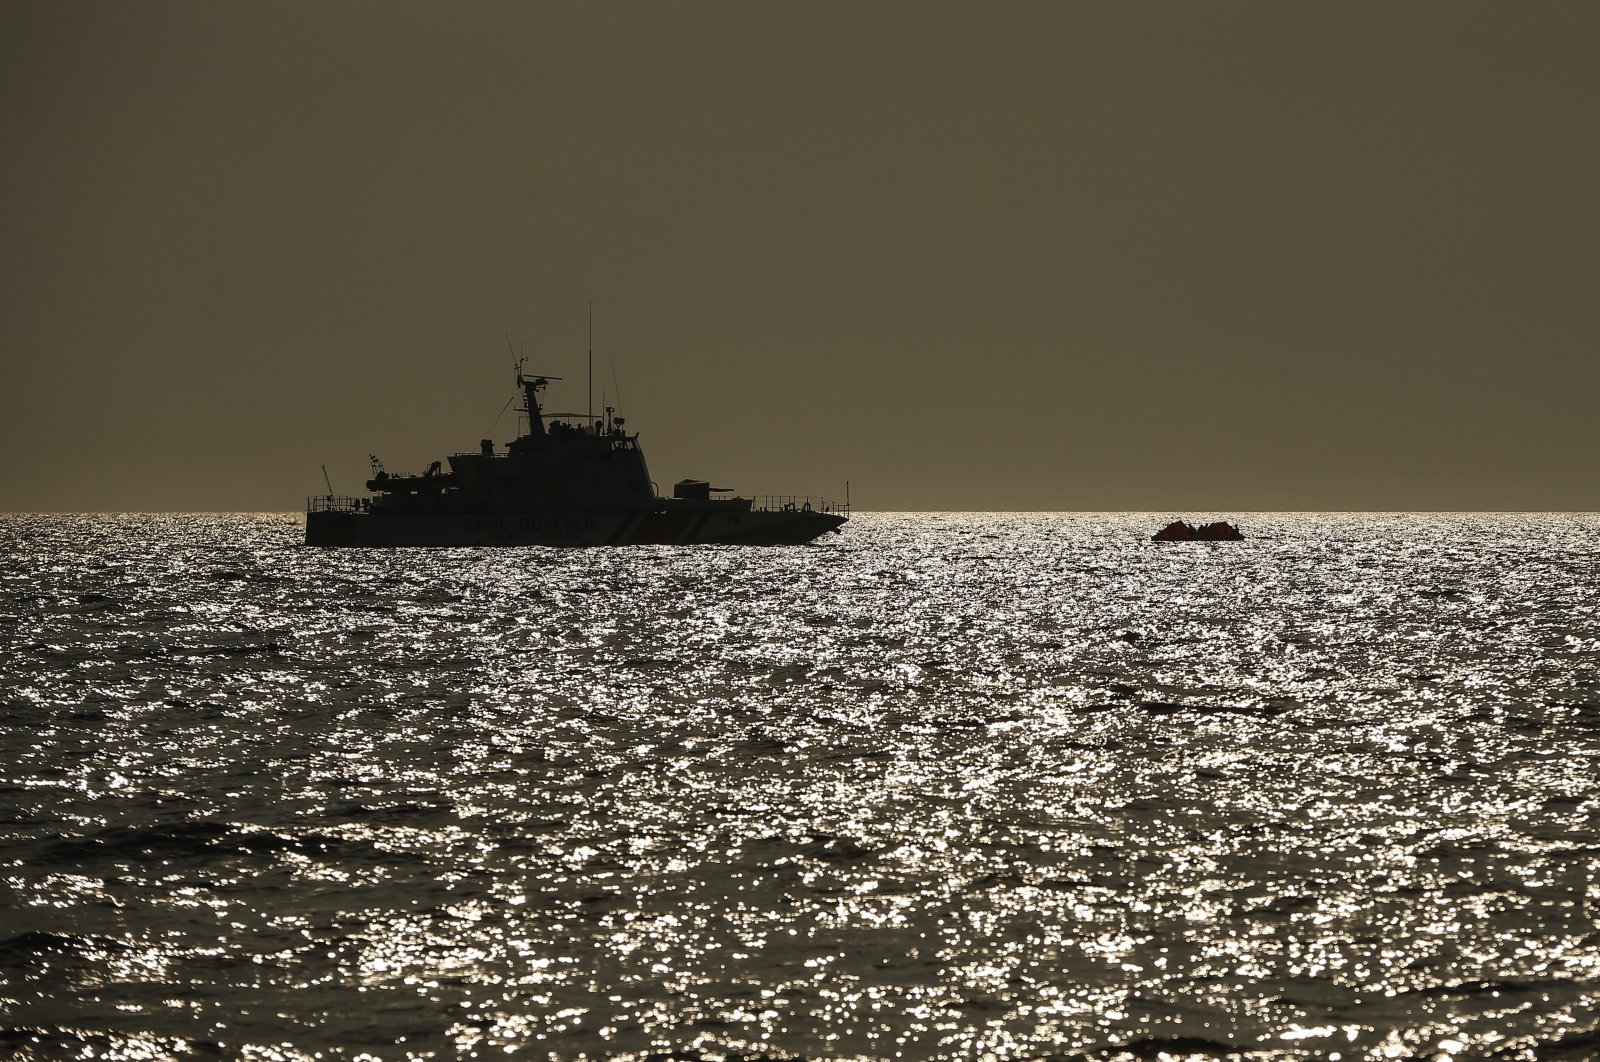 A Turkish Coast Guard vessel approaches a life raft carrying migrants in the Aegean Sea, between Turkey and Greece, Sept. 12, 2020. (AP Photo)